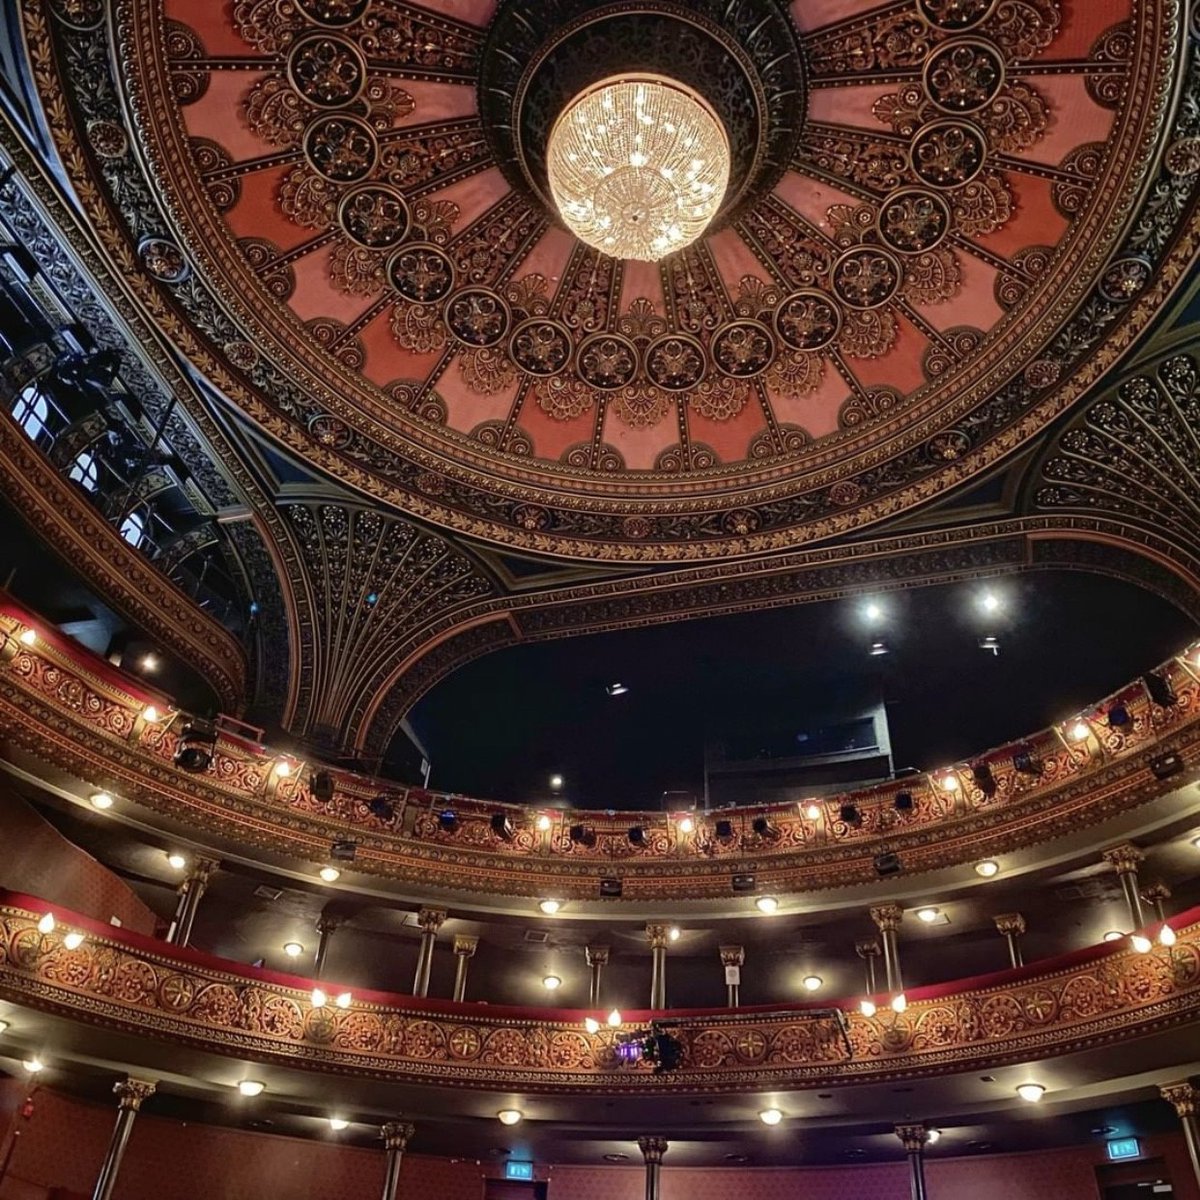 Today, we're hosting our third #dementia-friendly opera: #ONTraviata. It's also our first Relaxed Performance. We hope everyone has a fantastic time! There's: ✔️Reduced lighting ✔️House lights on low throughout ✔️Quiet spaces available ✔️Extra signage and staff ...and more.